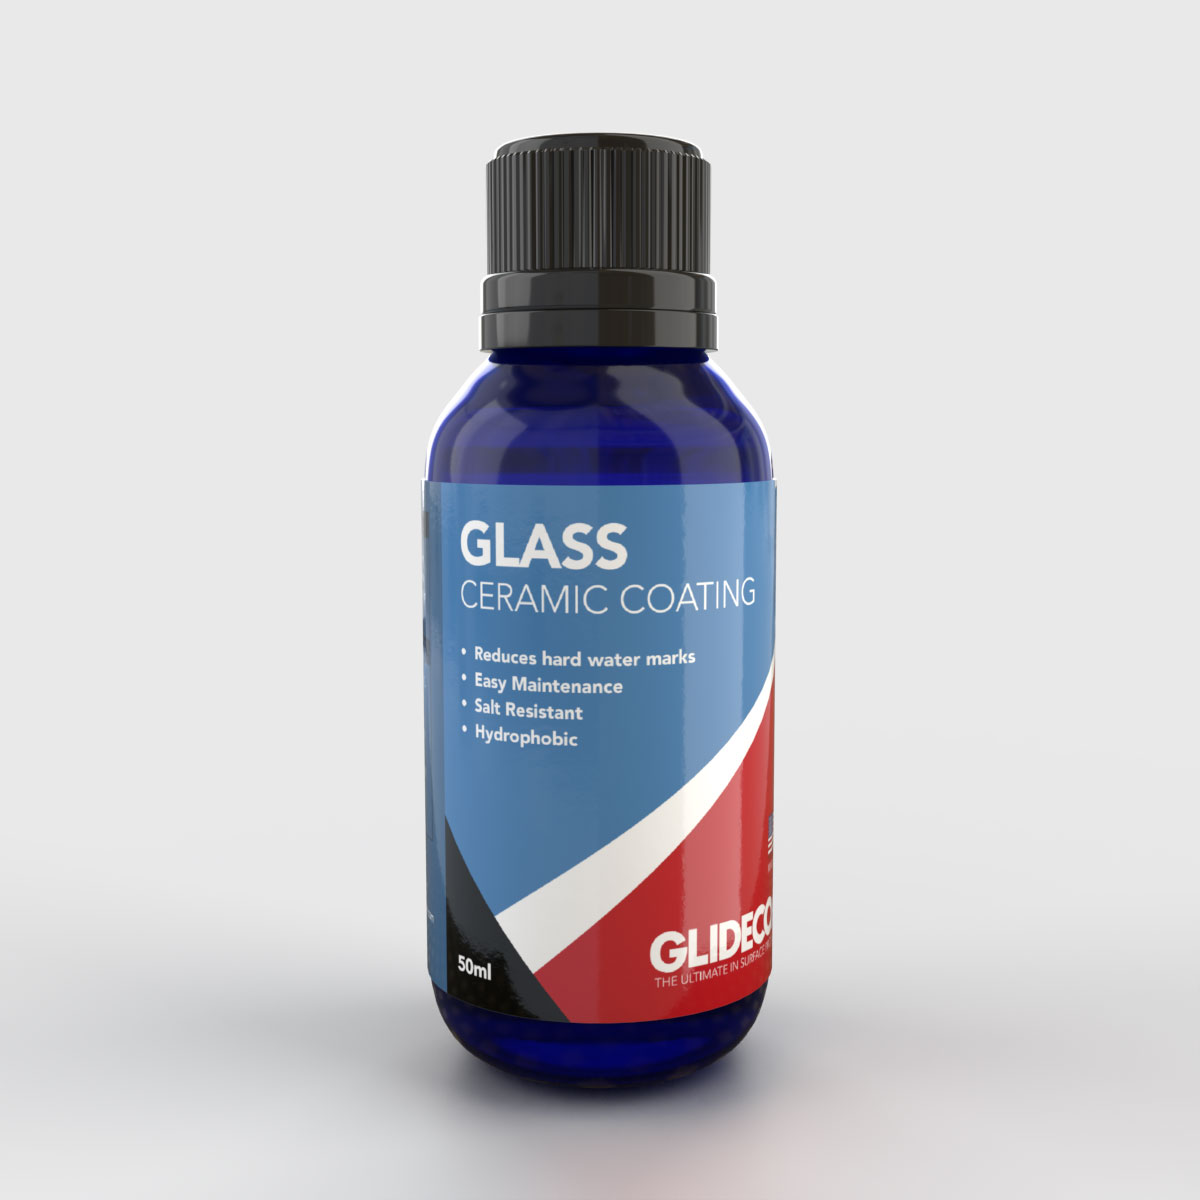 System X Glass Ceramic Coating, Is your glass ceramic coated? Having your  glass coated makes it super slick, hydrophobic, resistant to water spotting  and makes your glass very easy to